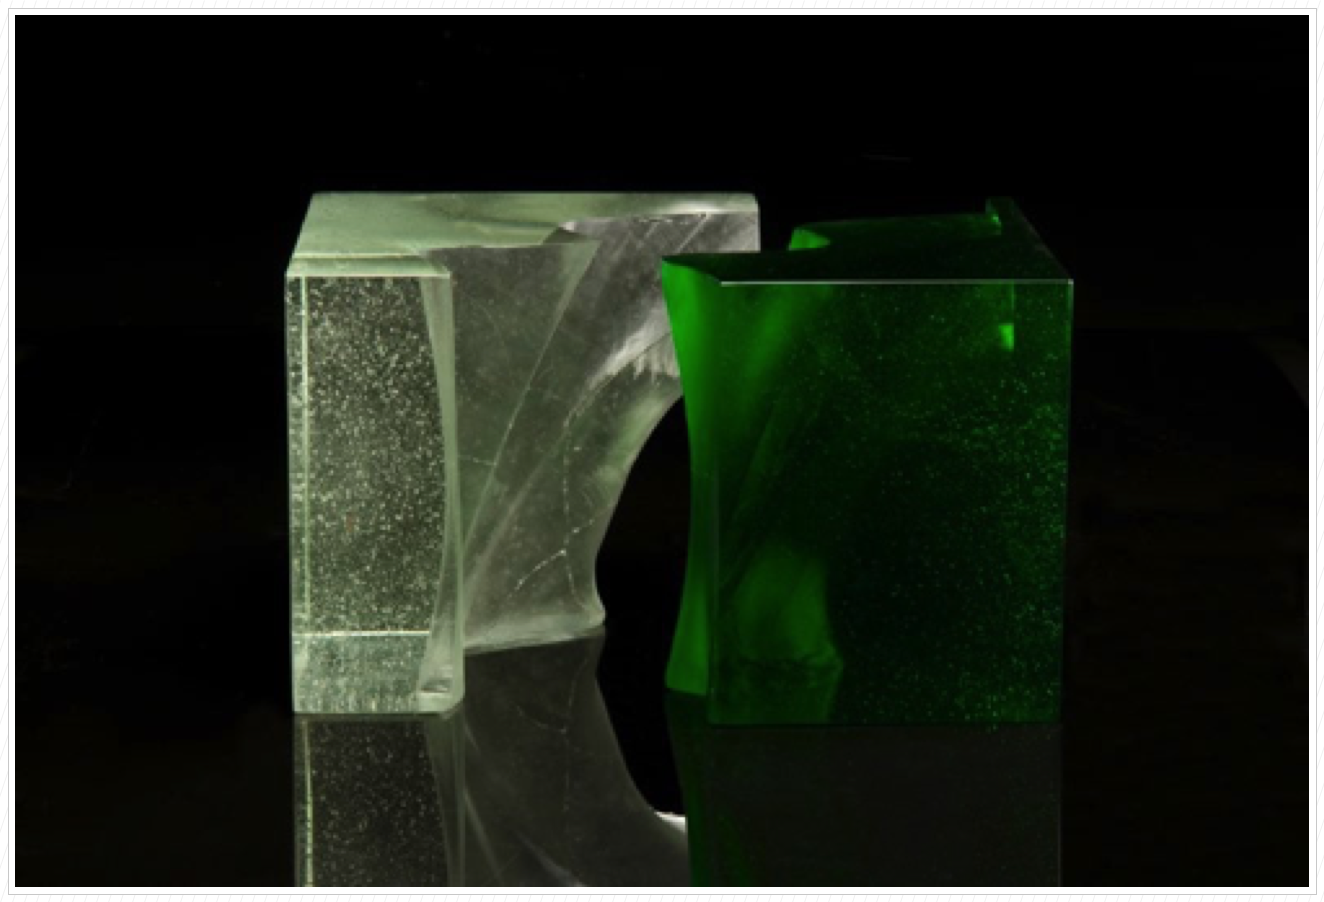 Green Cut Cube - Autumn
2015
Cast Soda Lime Glass (2 pieces)
10 x 14 x 10 in.
$18,000